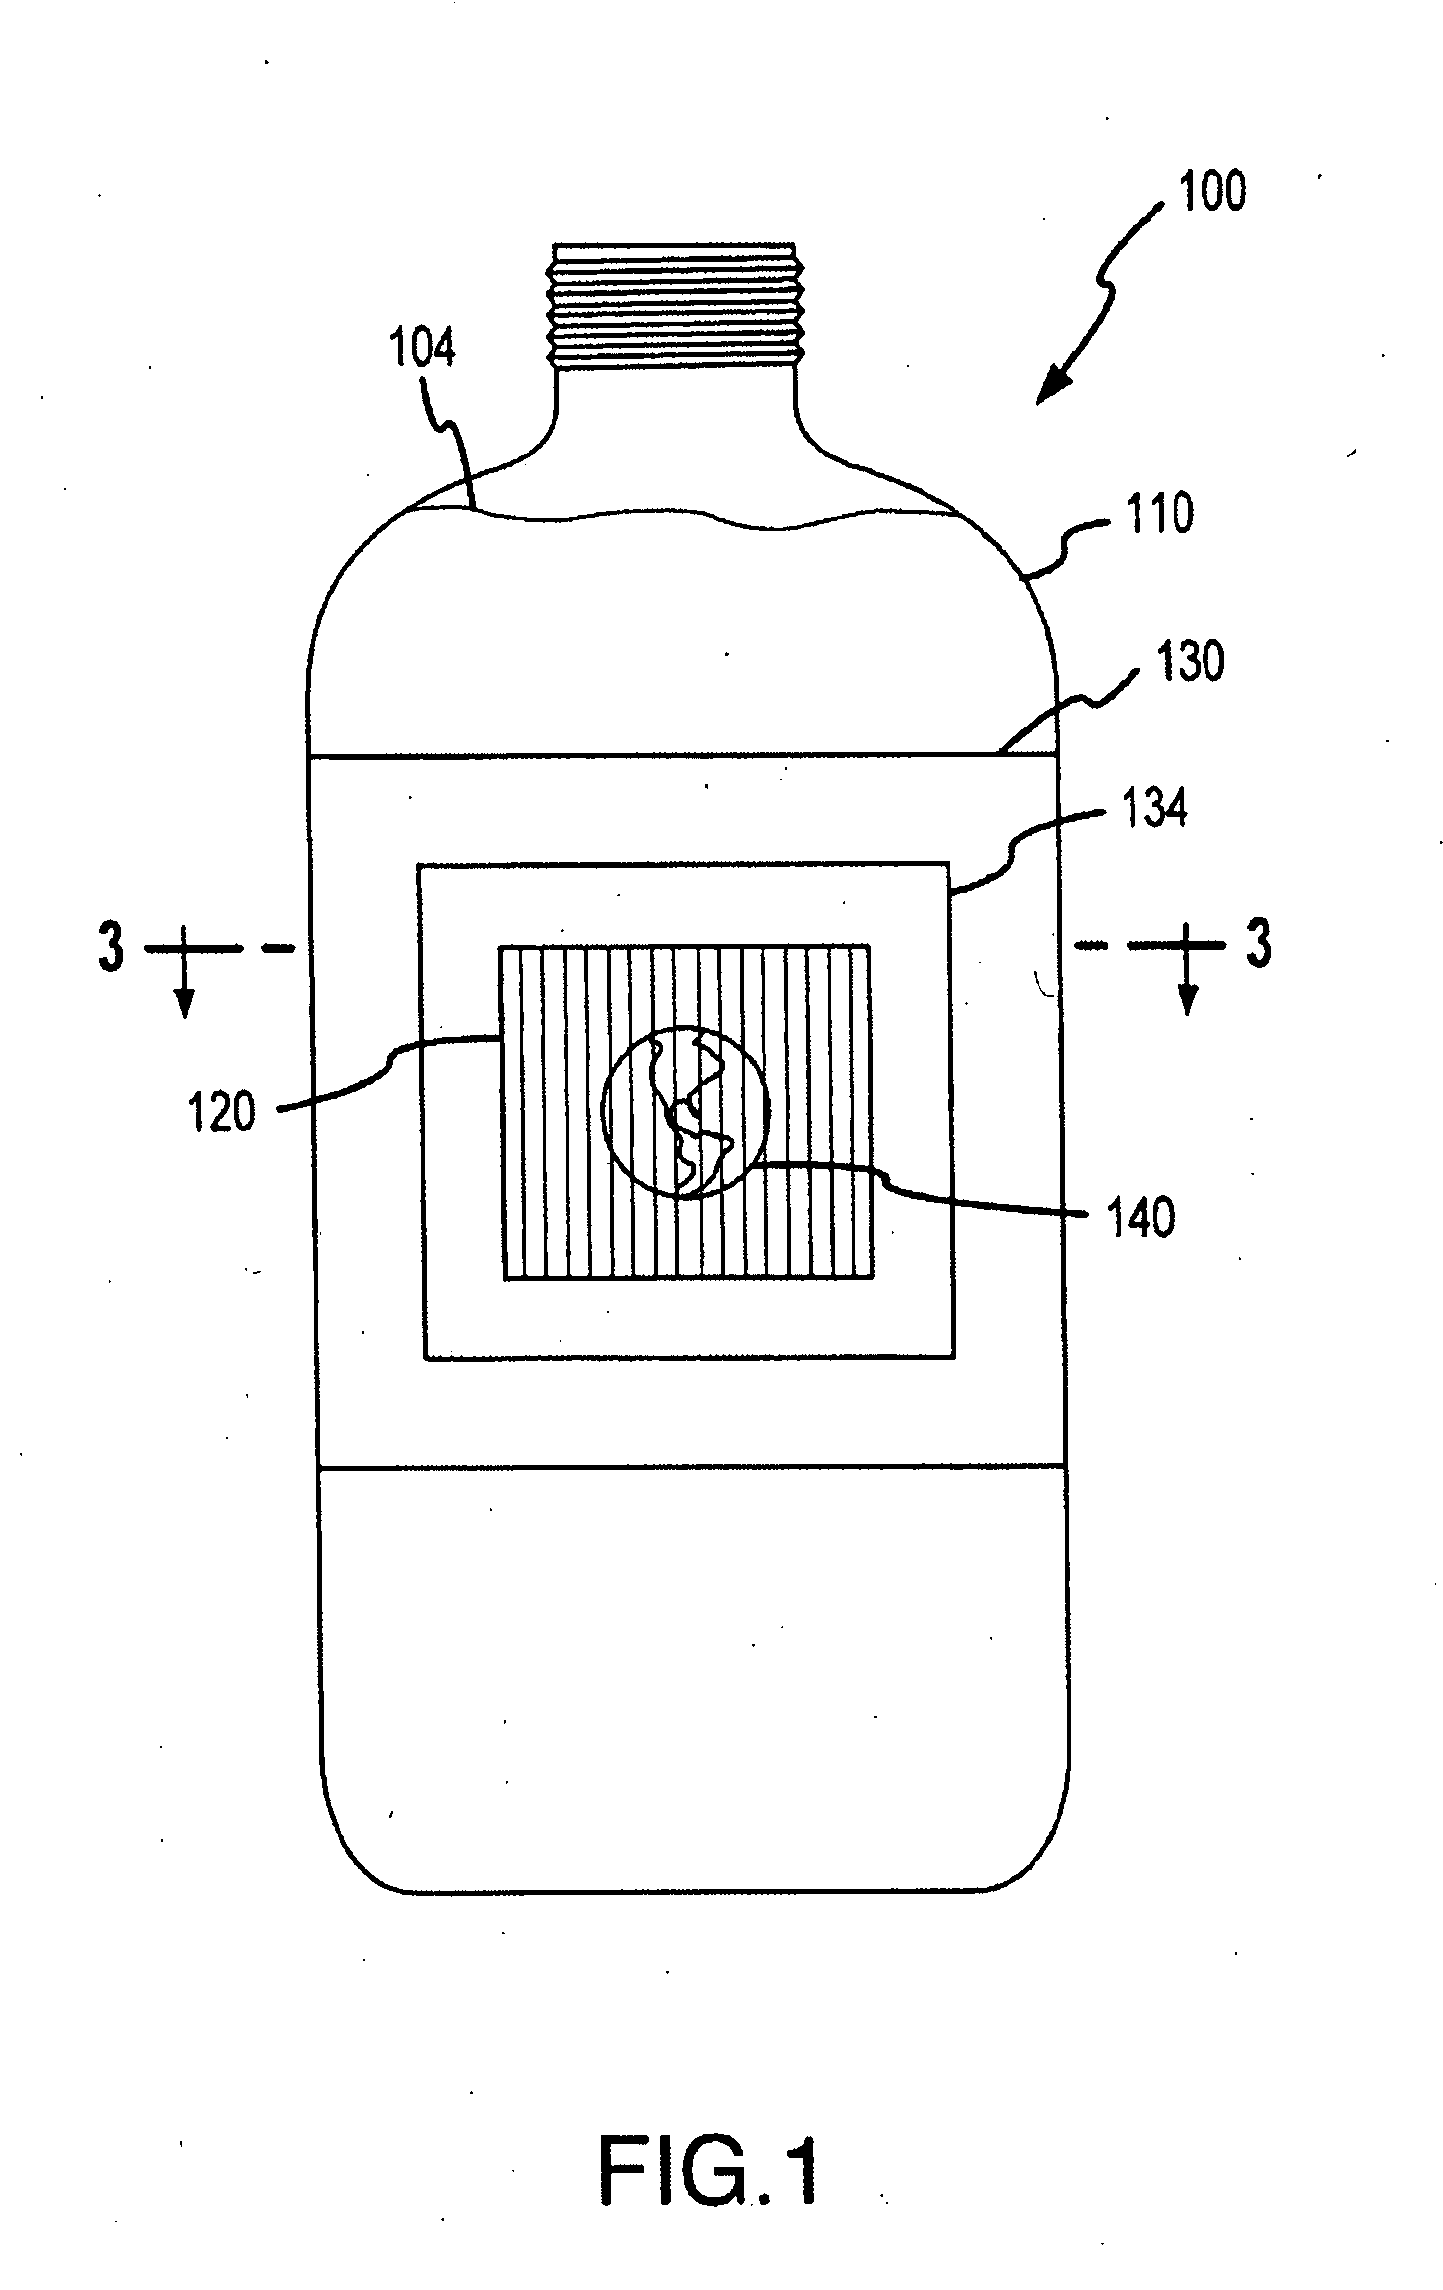 Visual effect apparatus for displaying interlaced images using block out grids